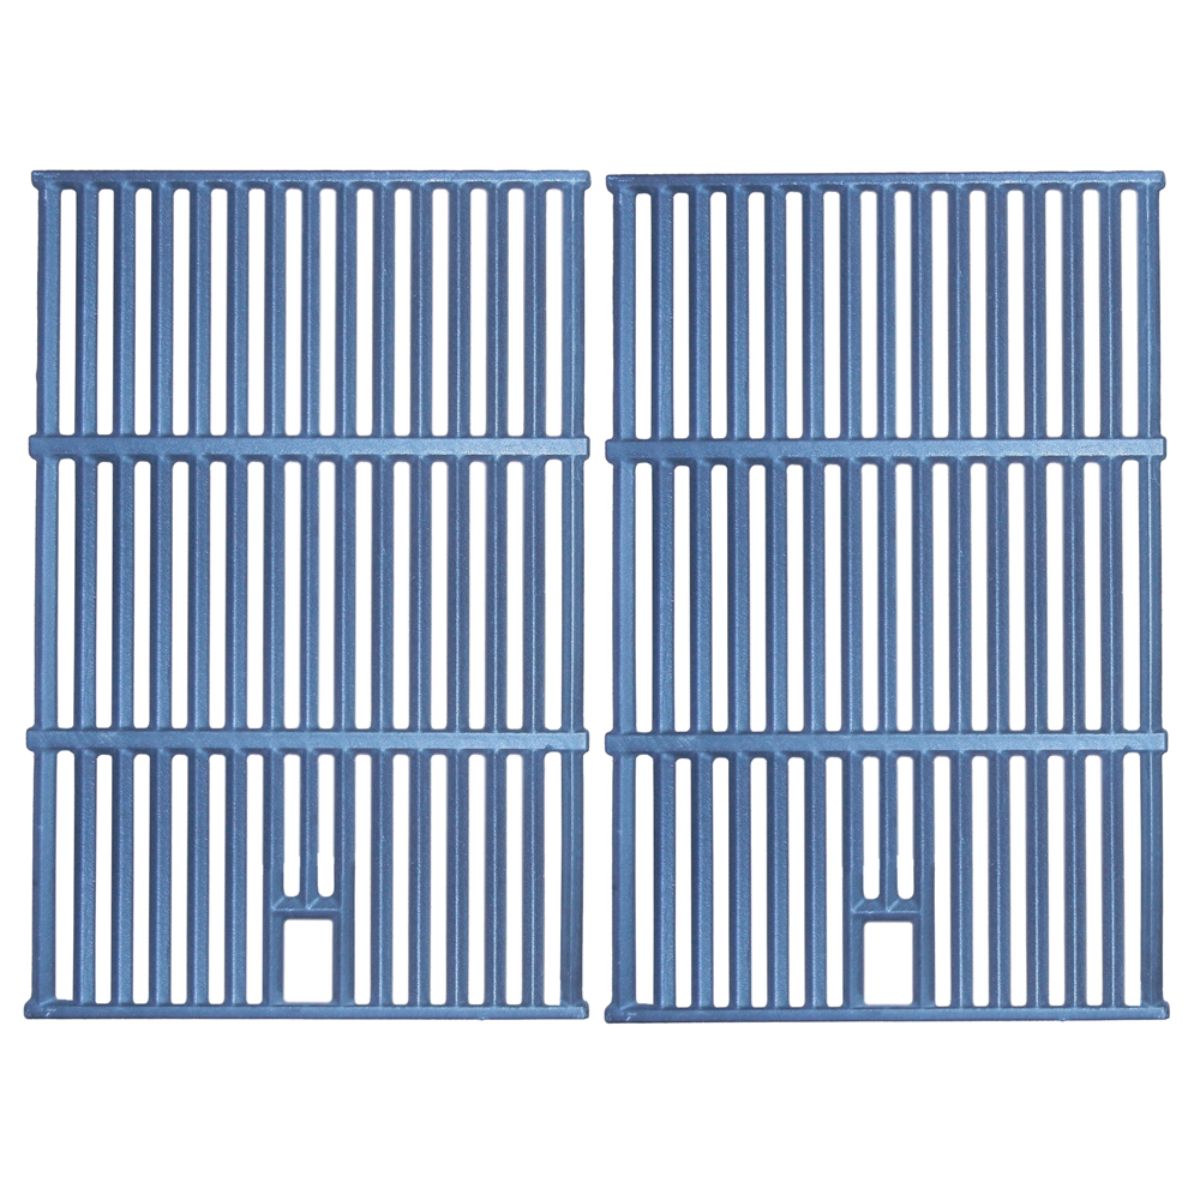 Outdoor Living and Style 2pc Matte Cast Iron Cooking Grid for Charbroil, Kenmore Gas Grills 25.5"